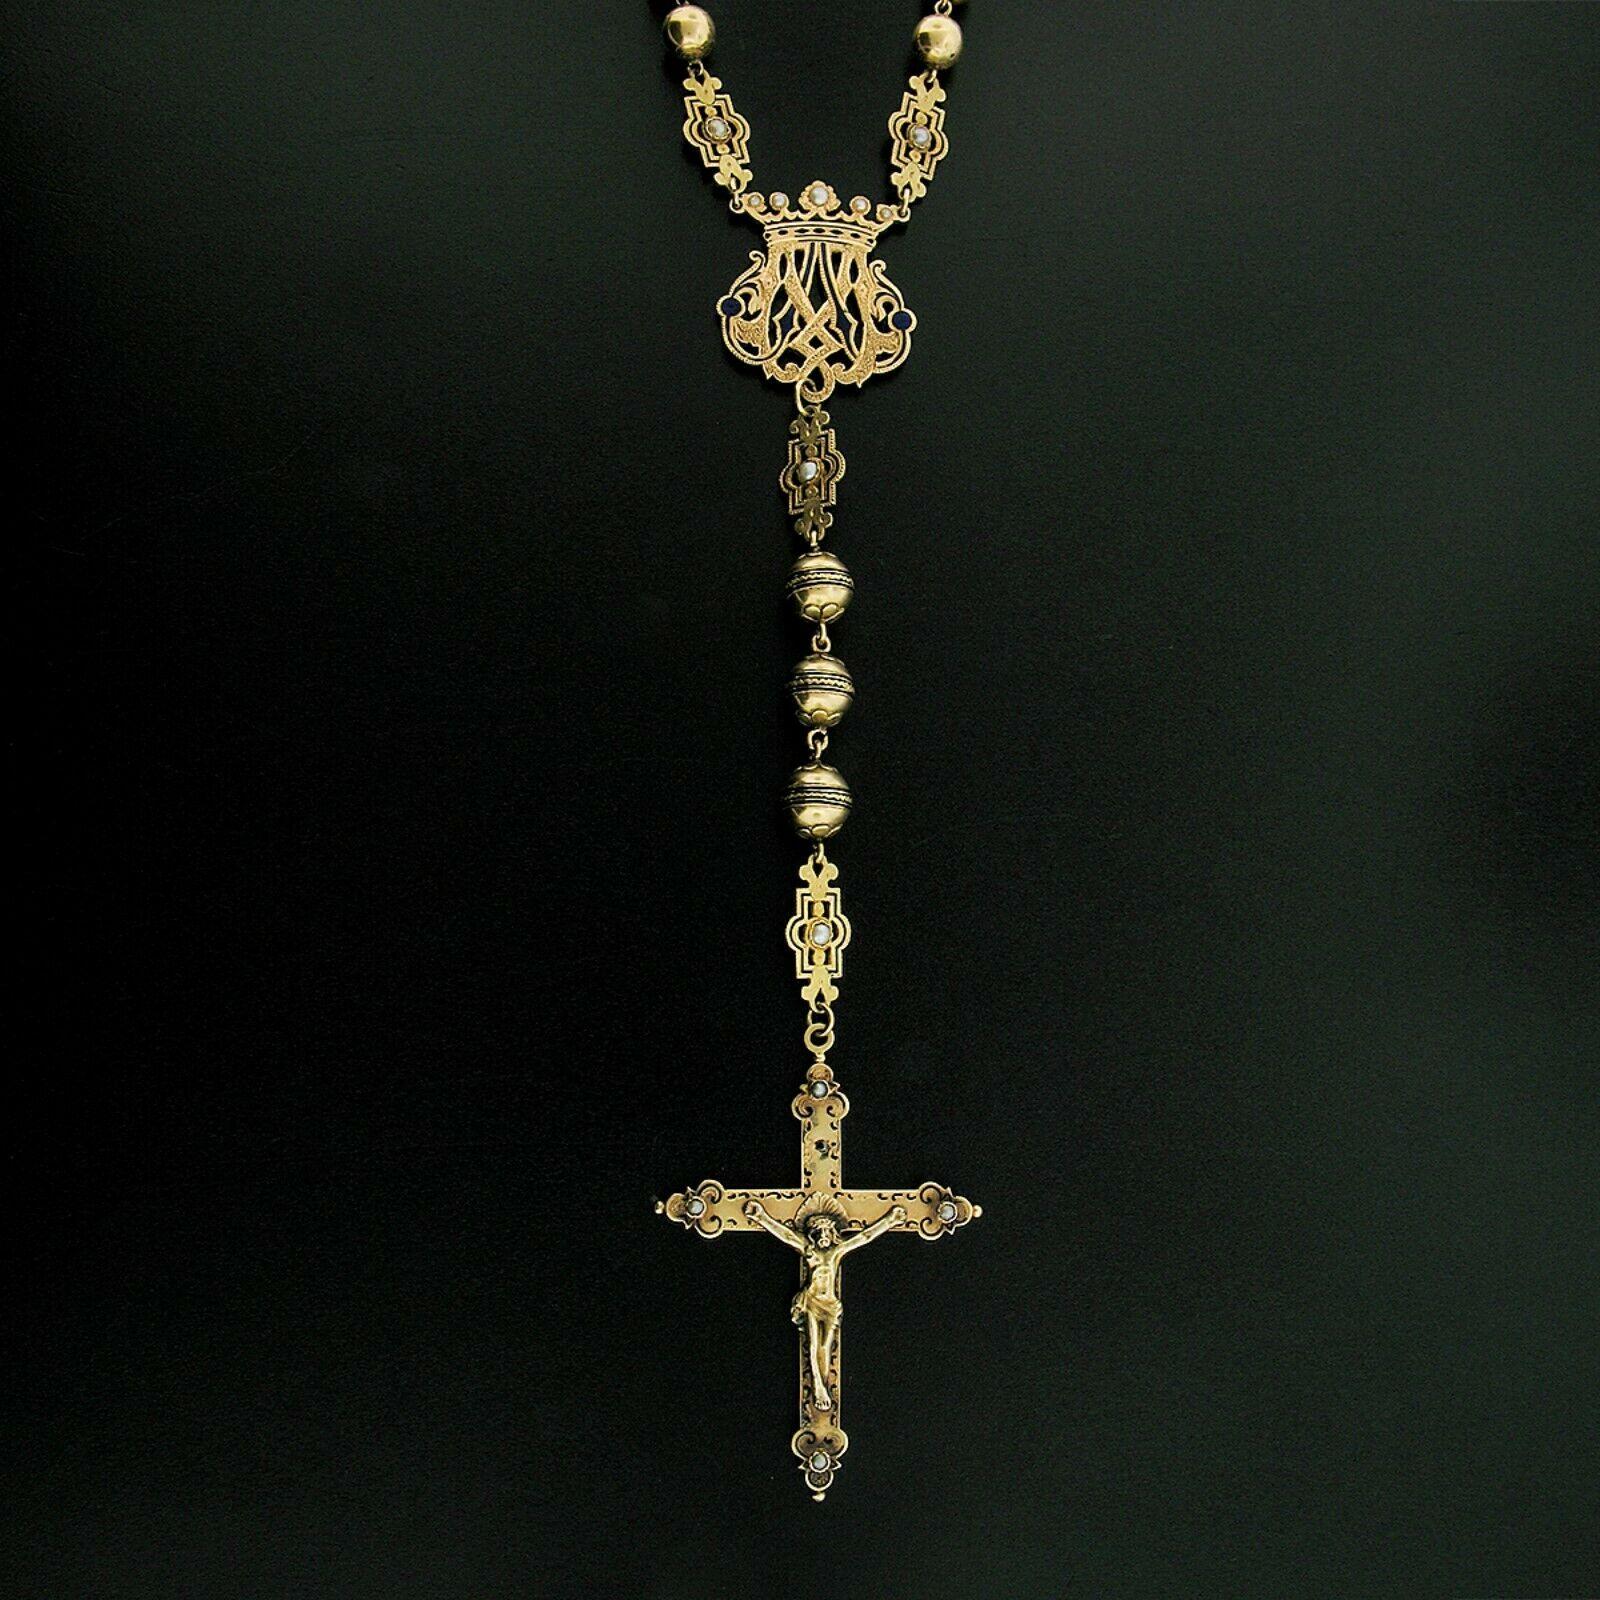 This substantial antique rosary was crafted from solid 18k yellow gold and features absolutely incredible detail including hand etched work and black, white, and blue enamel throughout. The chain consists of gold beads that show delicate hand etched